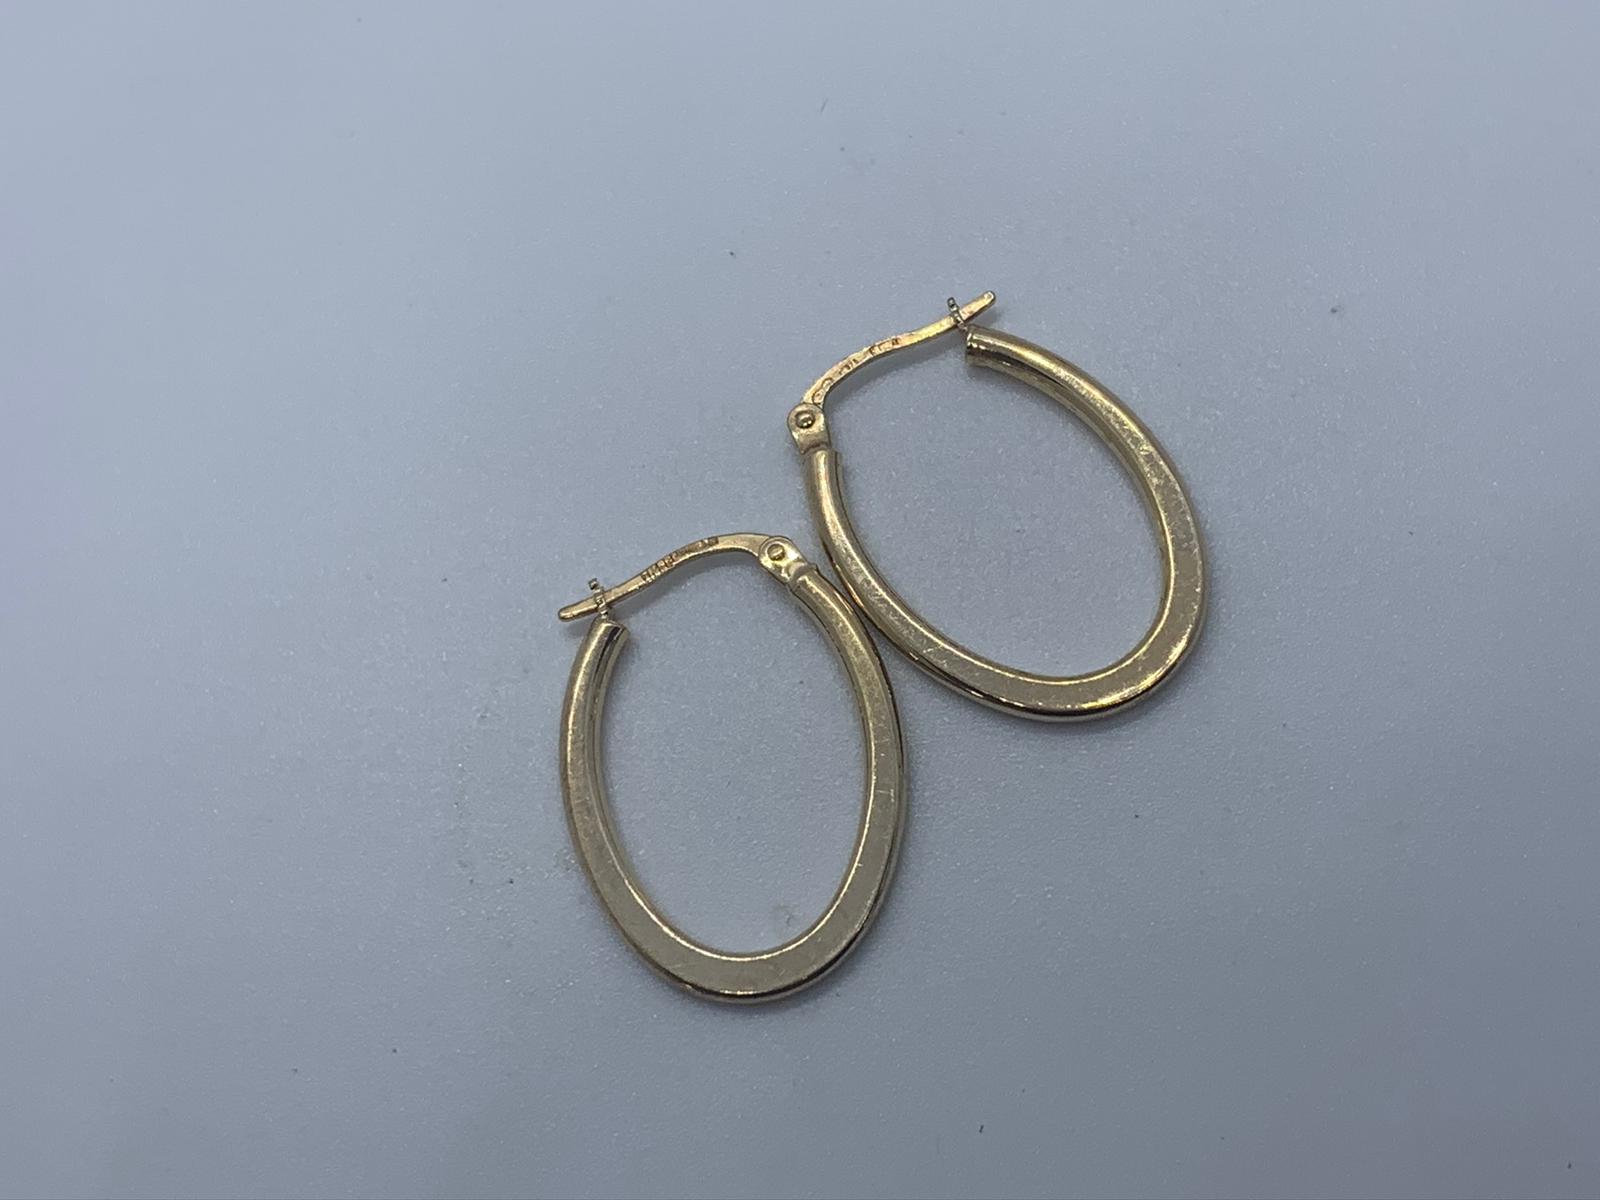 9ct gold earrings - Image 2 of 2